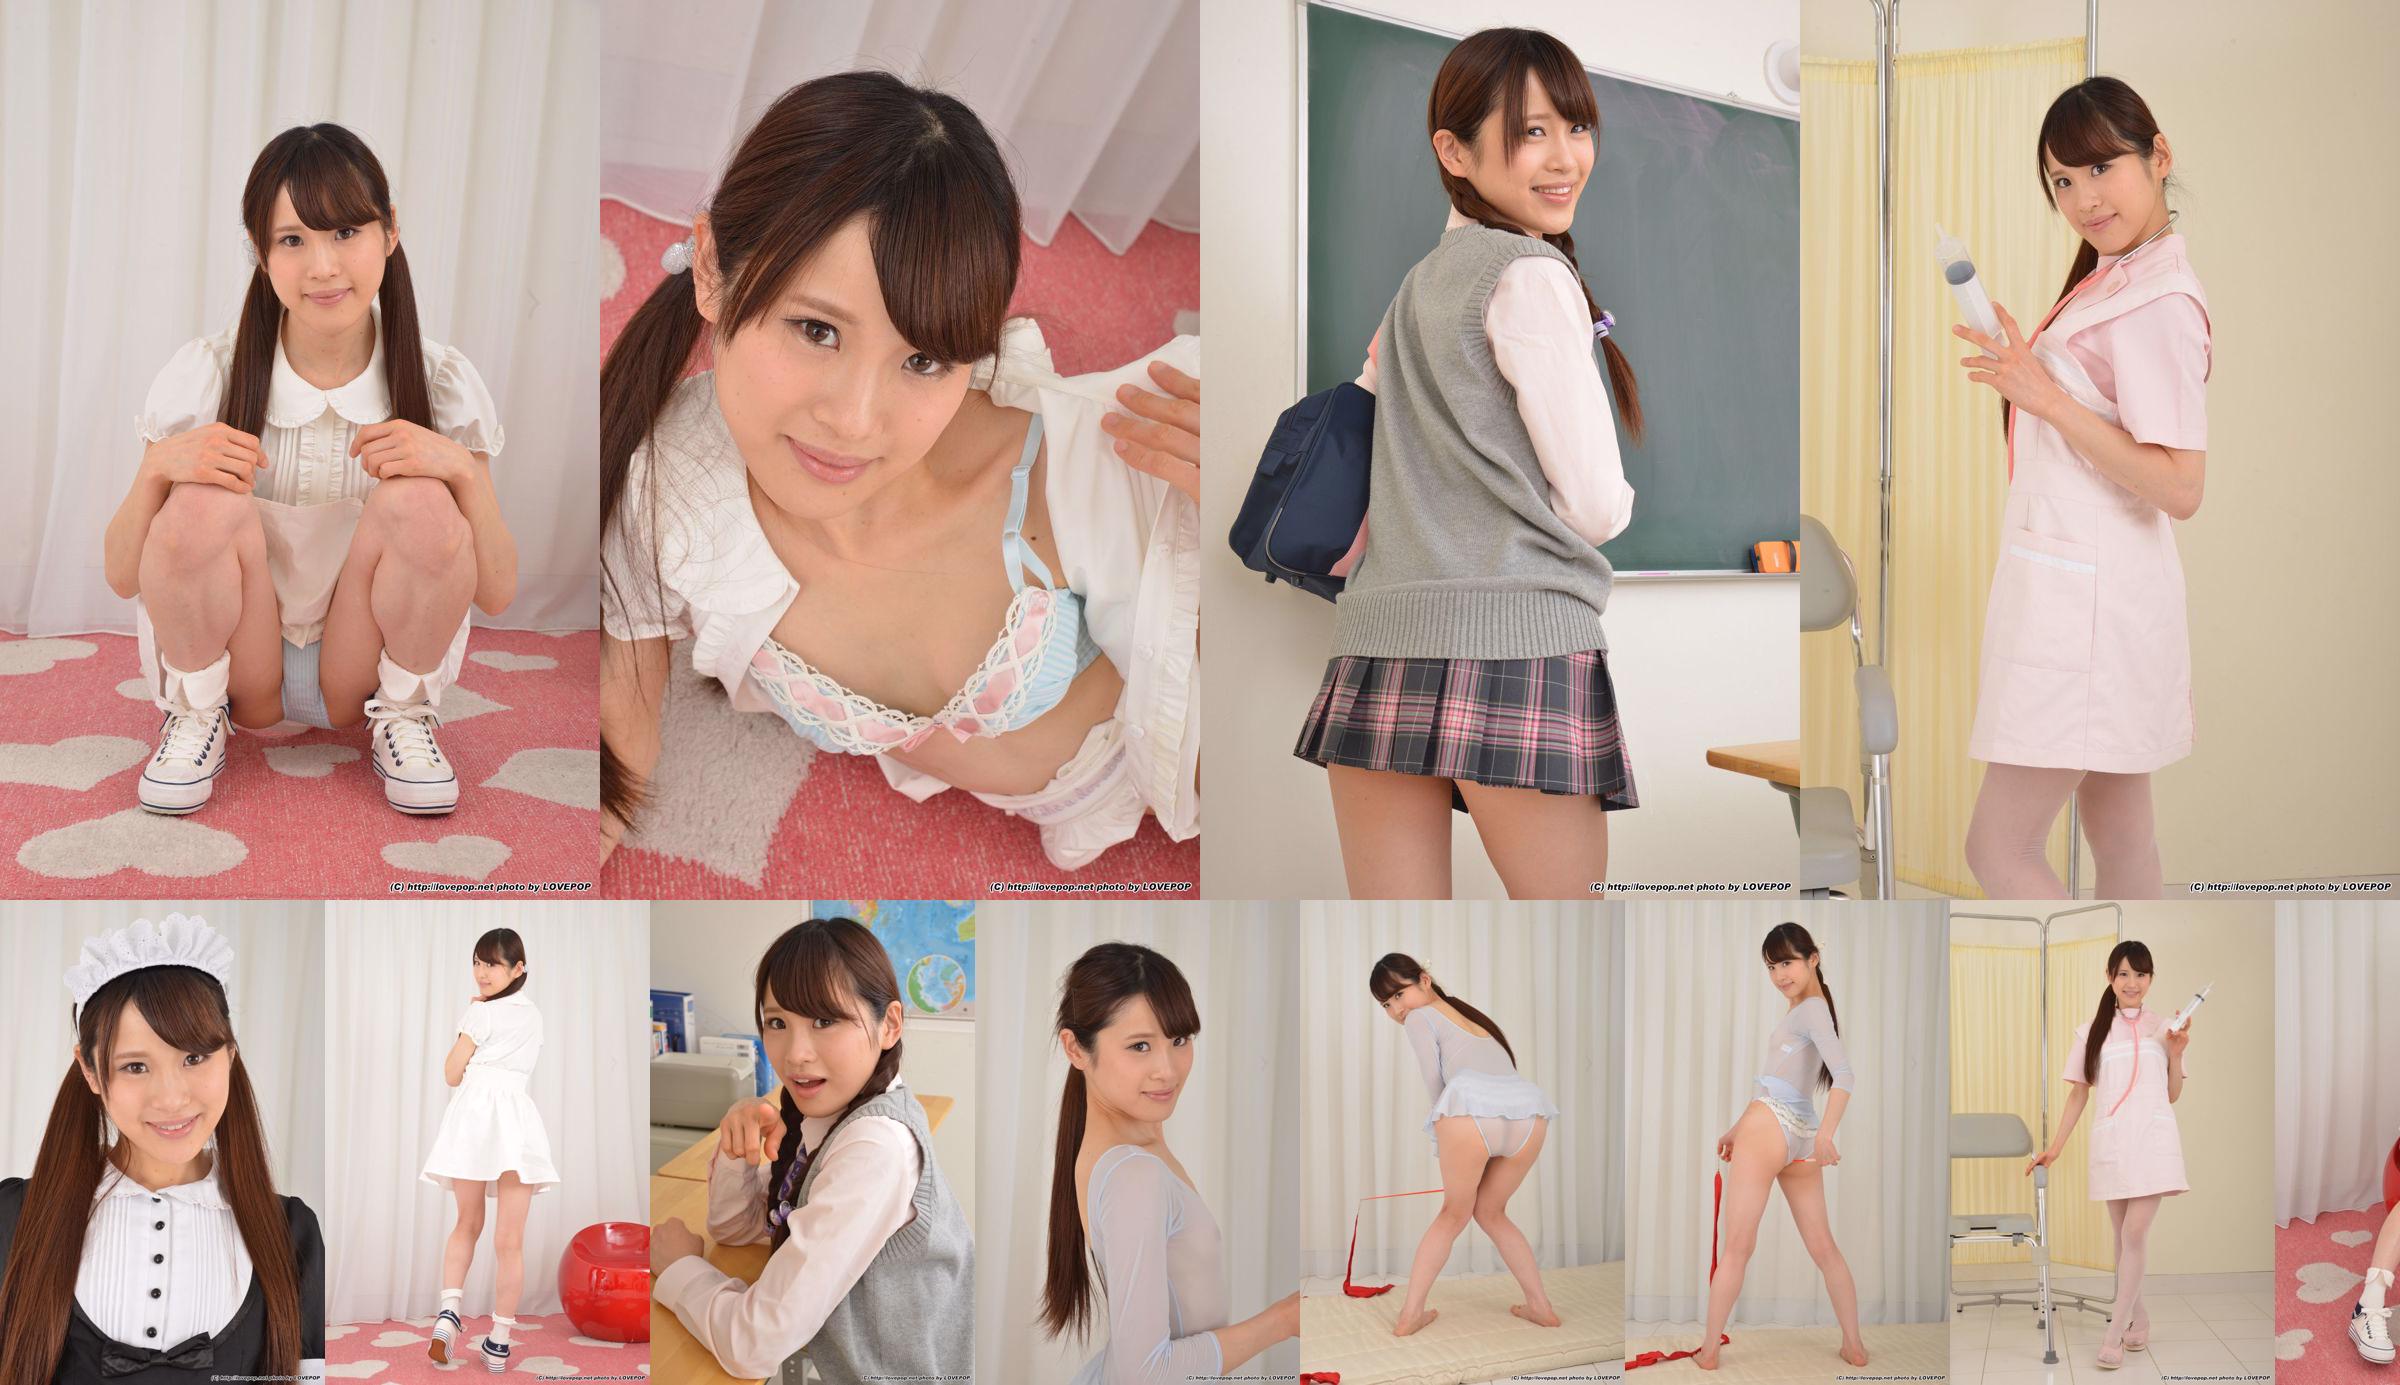 [LovePop] Chihiro Yuikawa "Perspective Gym Suit" No.0f1dd9 Page 7